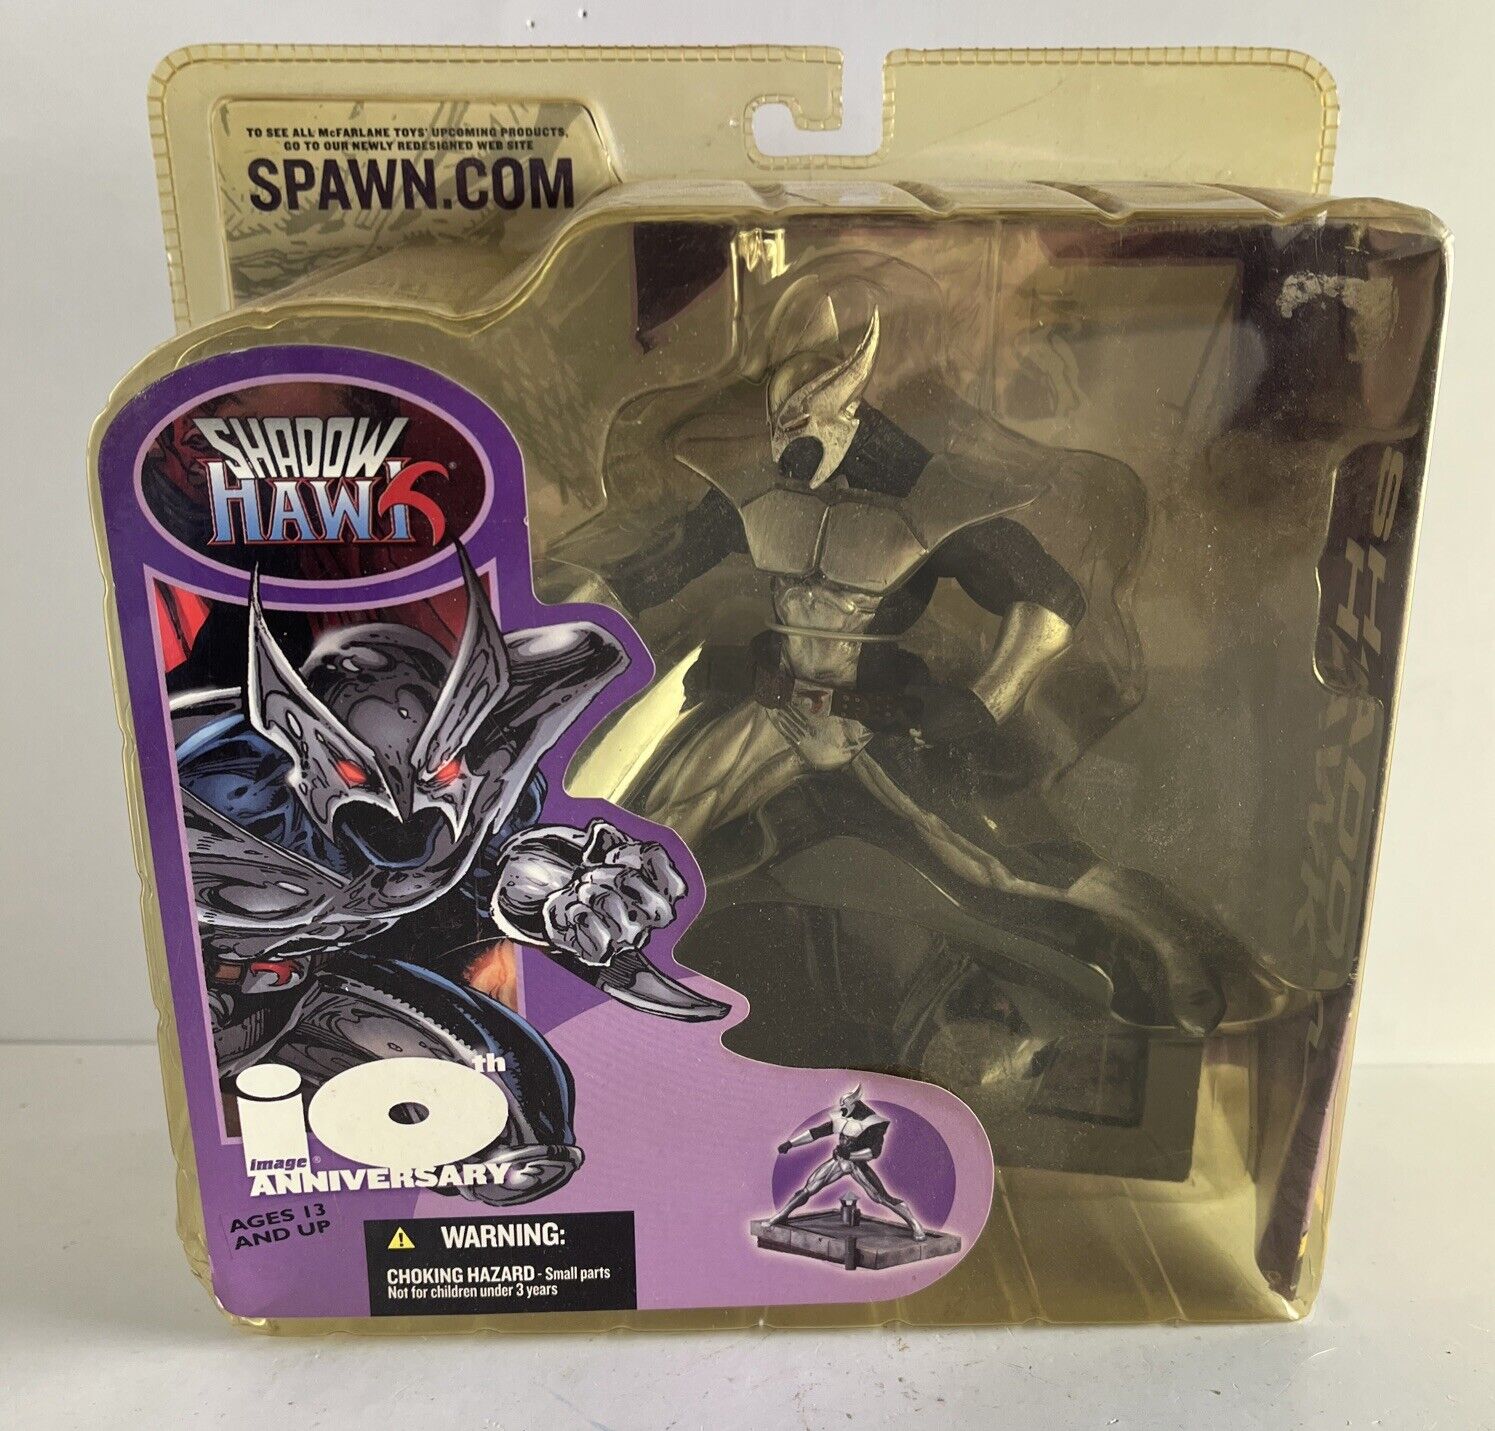 McFarlane Toys Shadow Hawk 10th Image Anniversary Figure and Stand